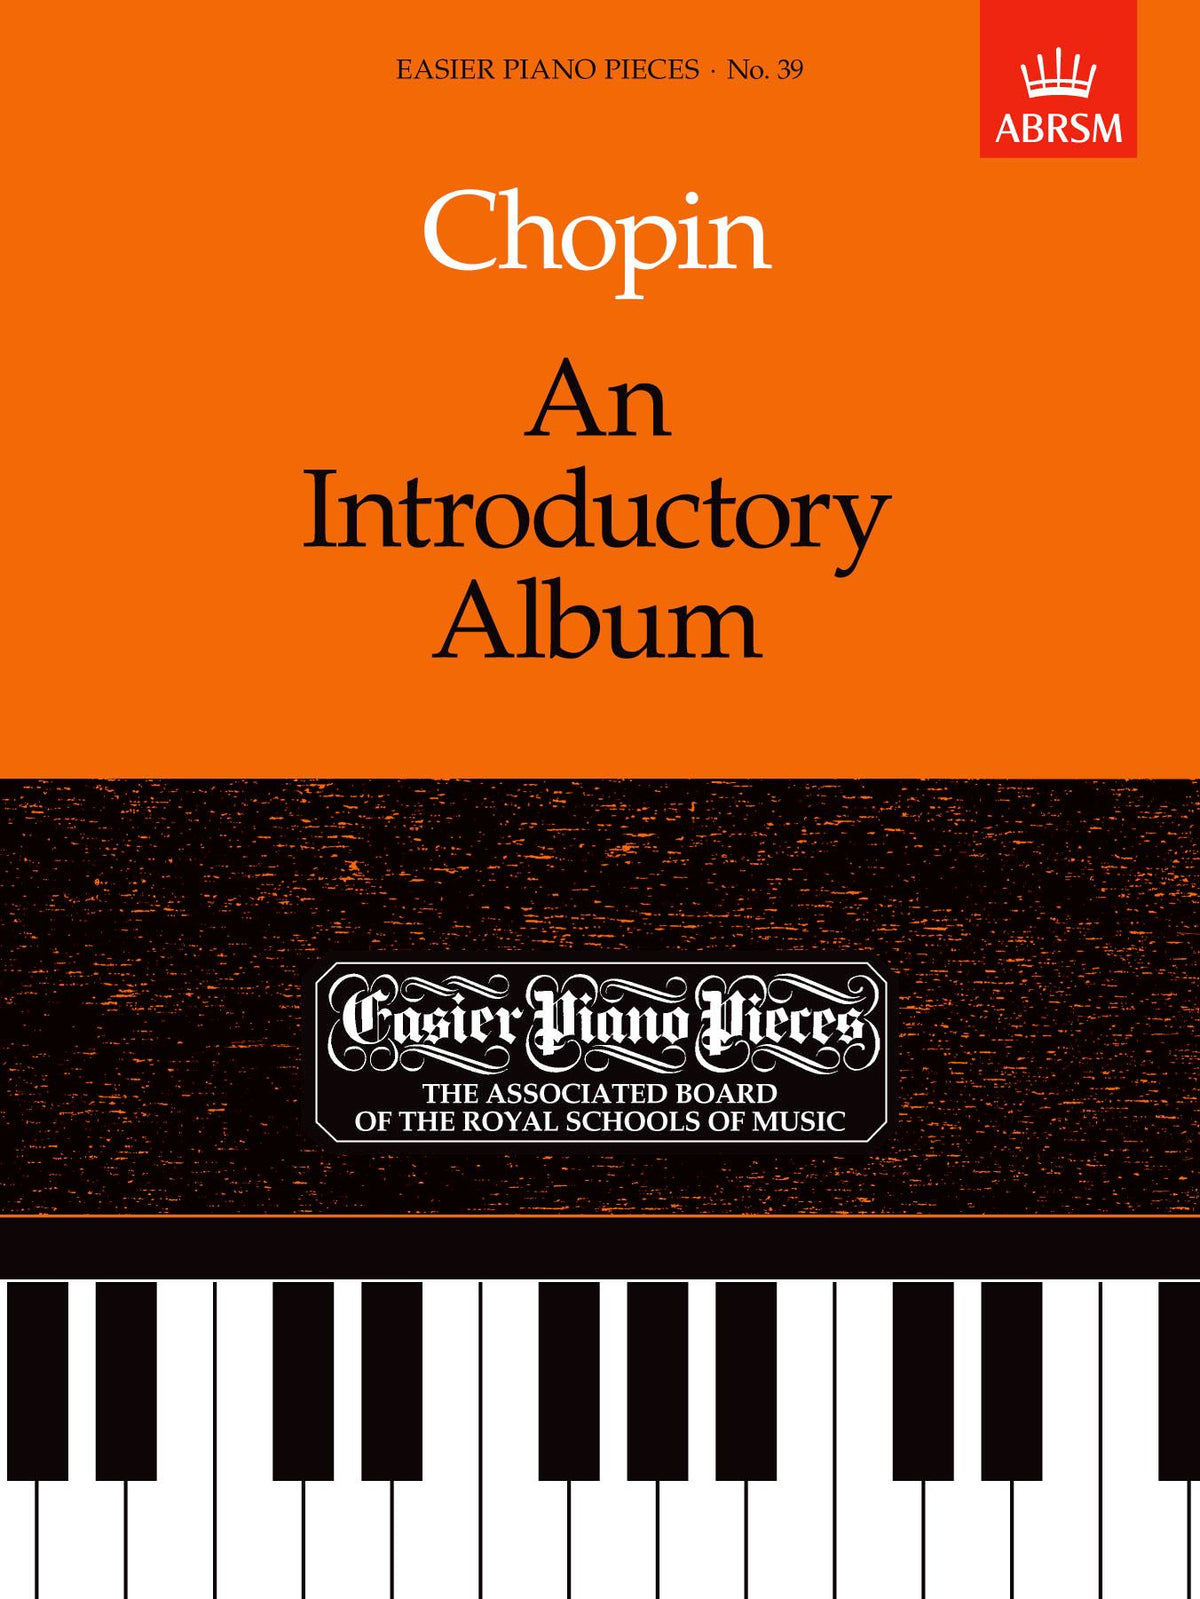 Chopin Introductory Album